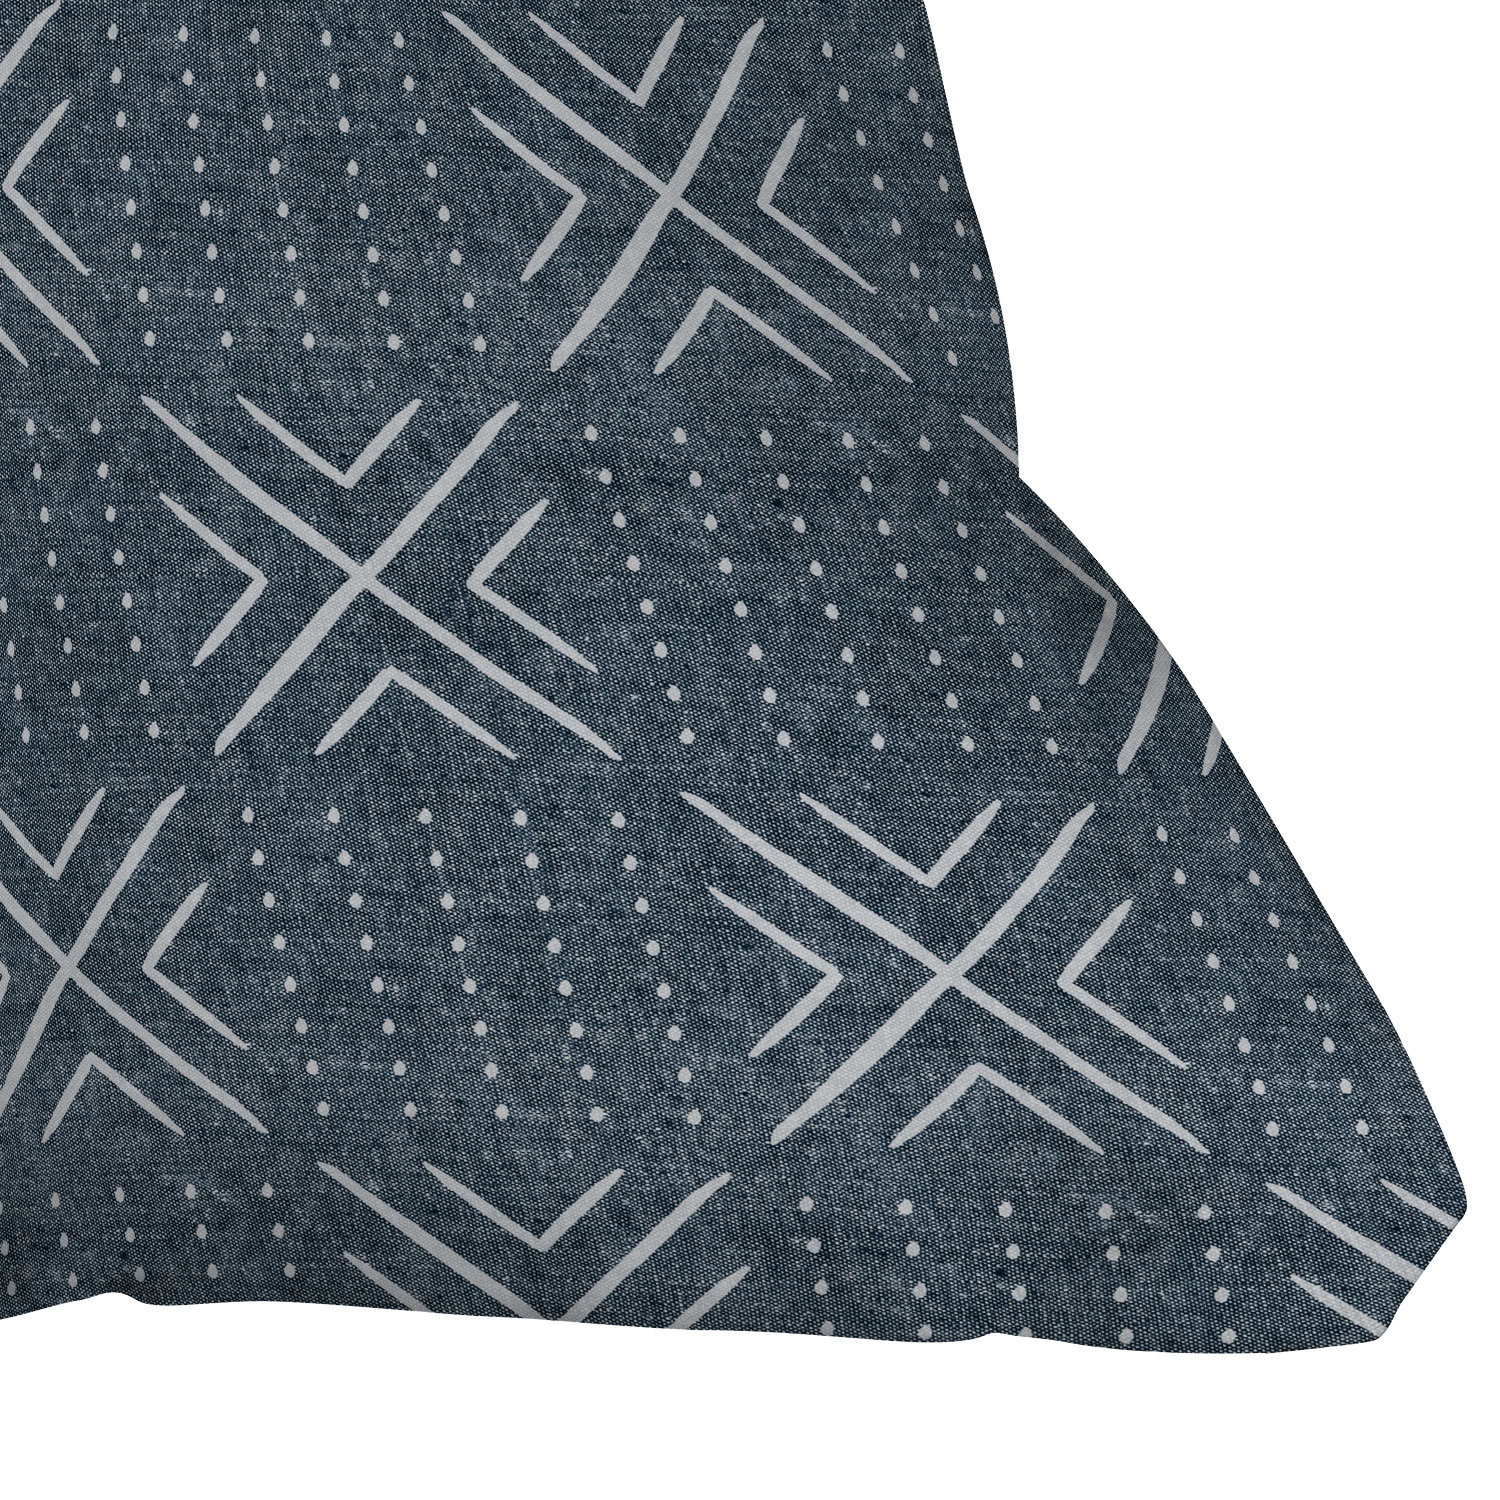 Mud Cloth Tile Navy by Little Arrow Design Co - Outdoor Throw Pillow 20" x 20" - Image 2